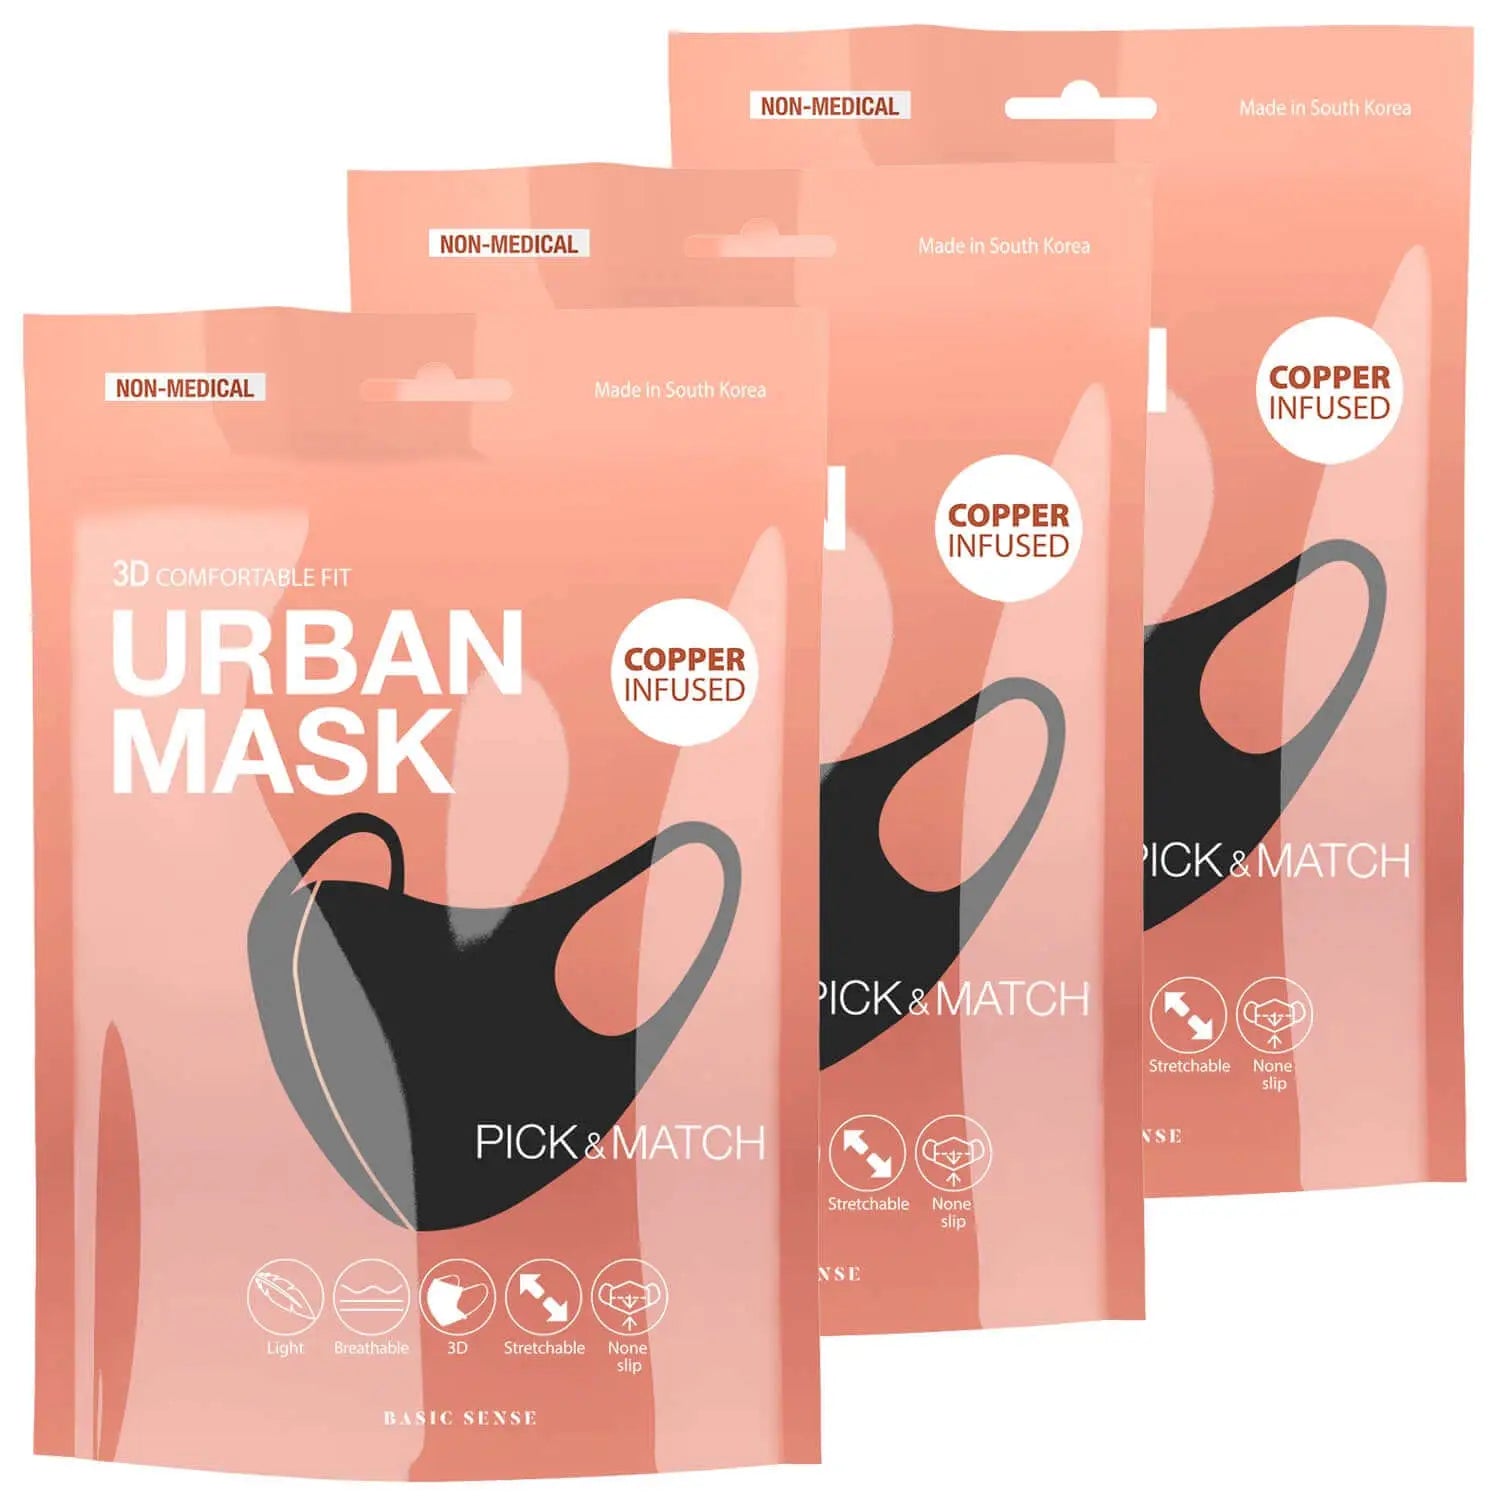 3 pack of Copper-Infused Face Masks with Filter